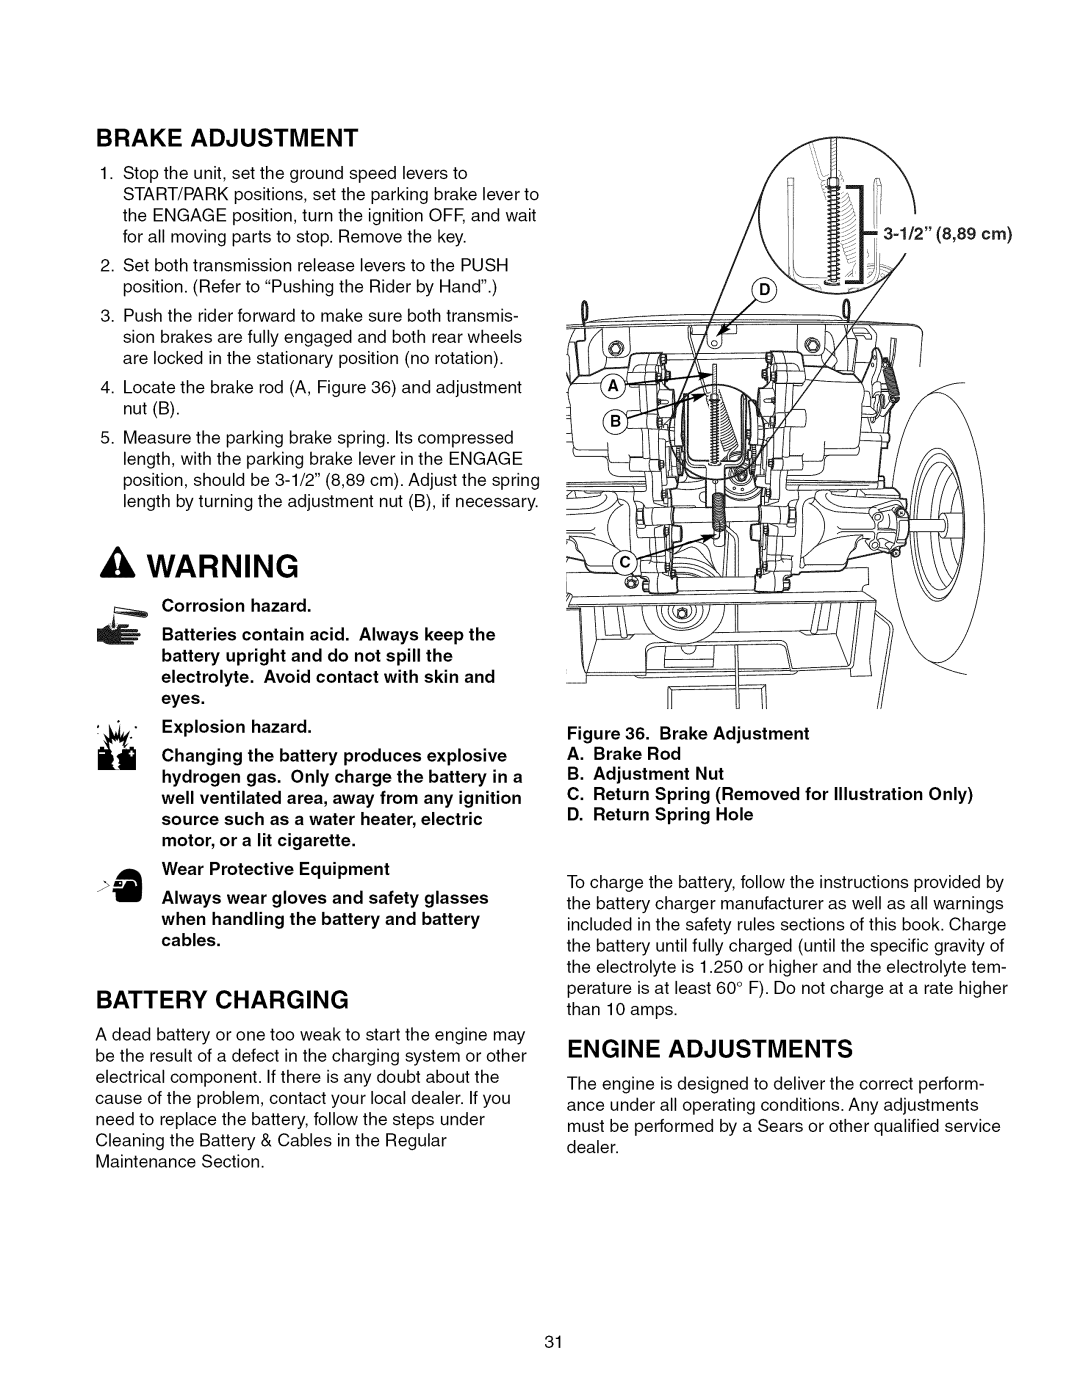 Craftsman 107.289860 Brake Adjustment, Battery Charging, Engine Adjustments, for all moving parts to stop. Remove the key 